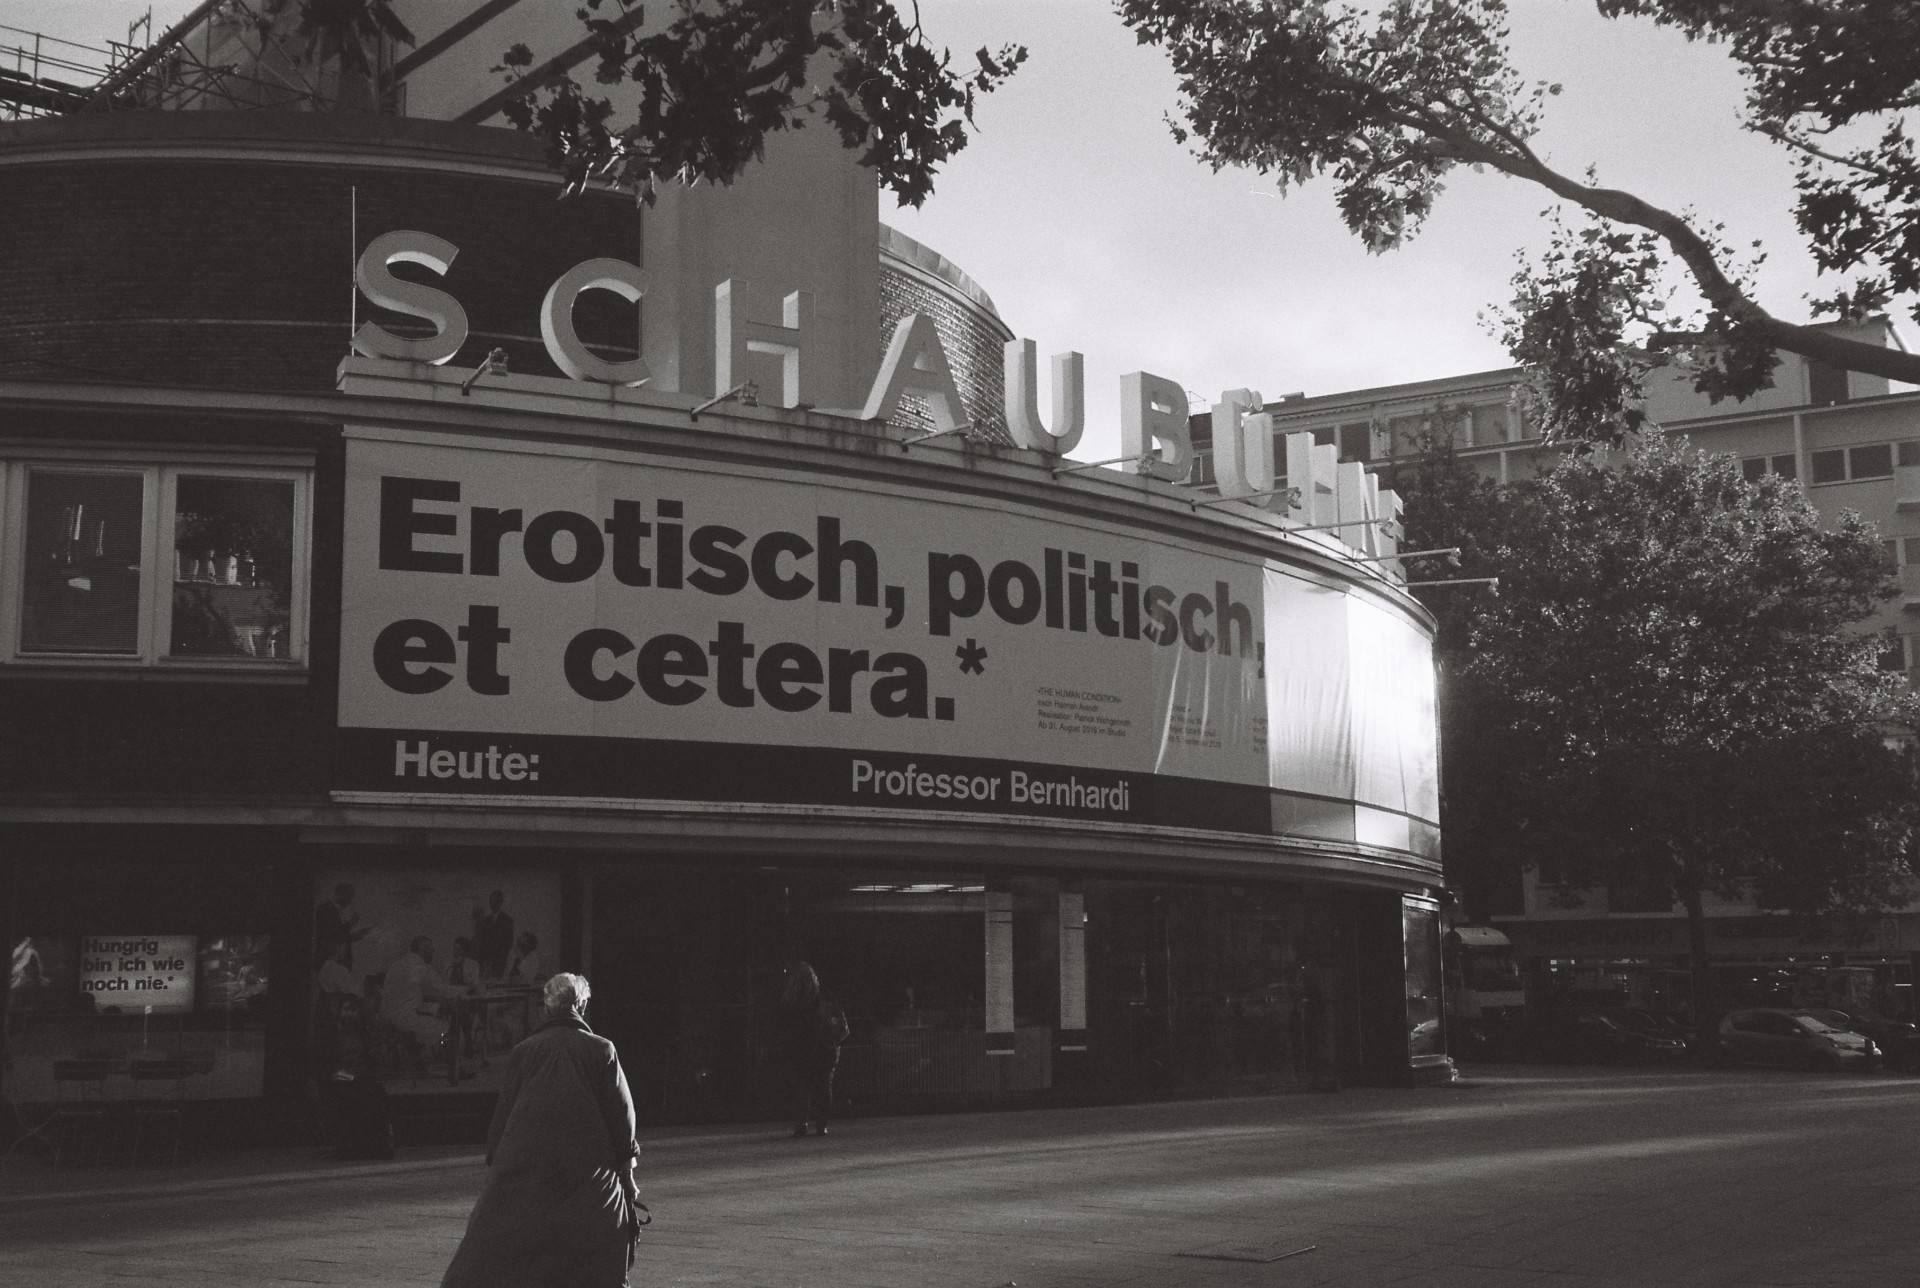 entrance of a theatre with a large sign above that reads "Erotisch, politisch, et cetera*", a person seen directly from behind is walking to the entrance